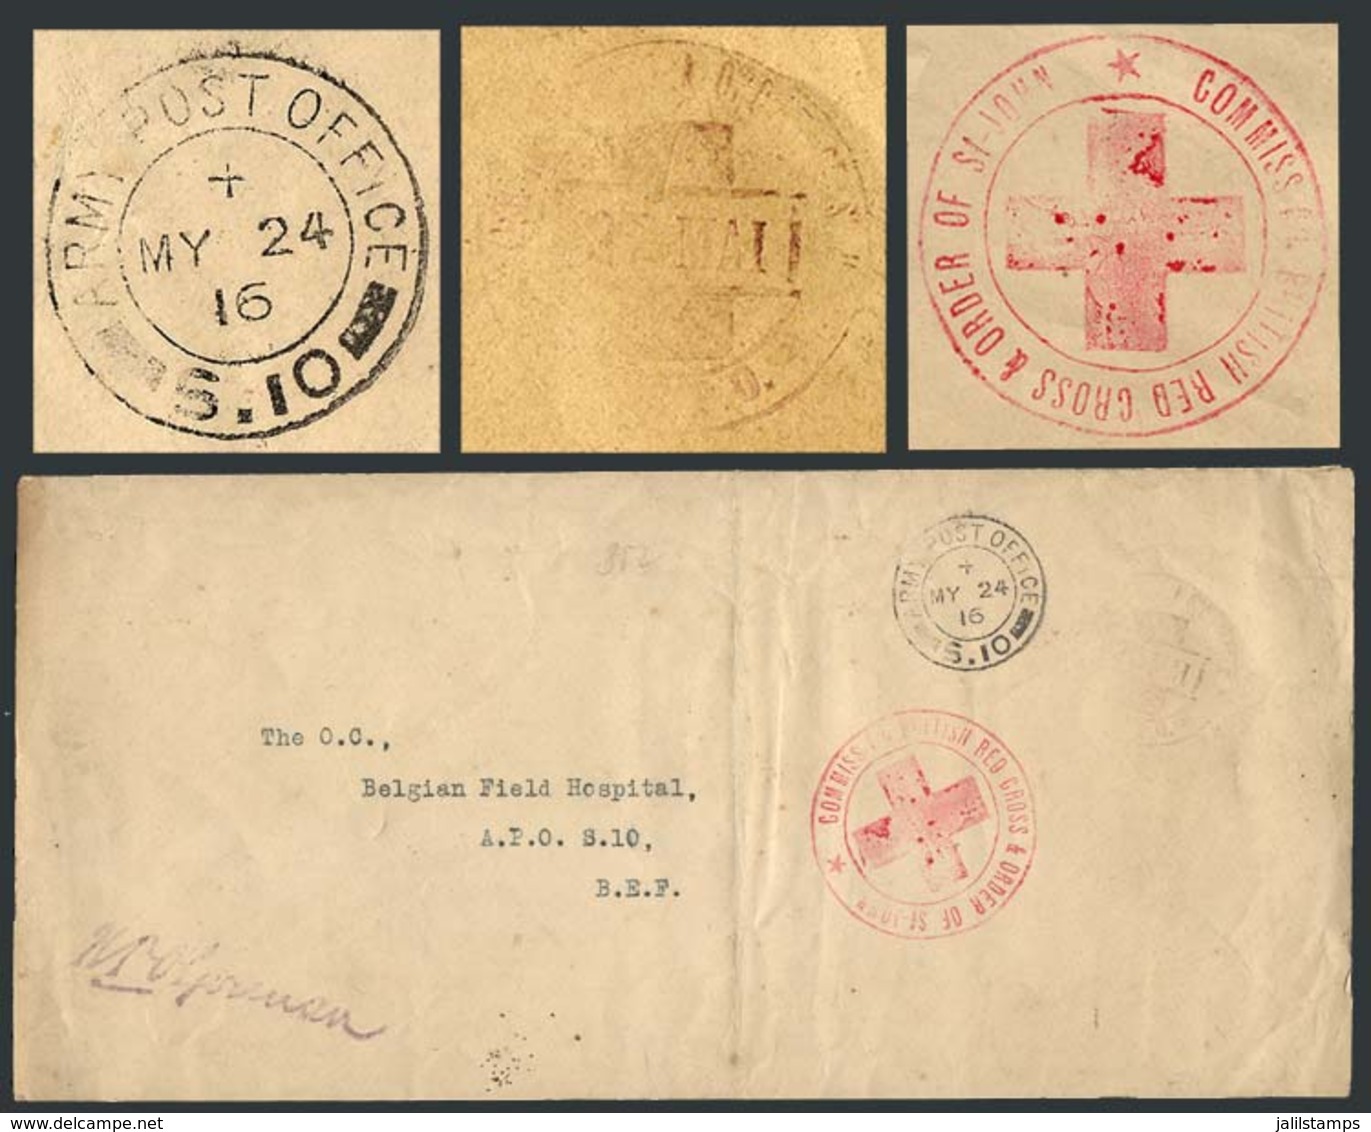 995 GREAT BRITAIN: Interesting RED CROSS Cover Posted On 24/MAY/1916 Via The Army Post, Very Interesting! - Oficiales